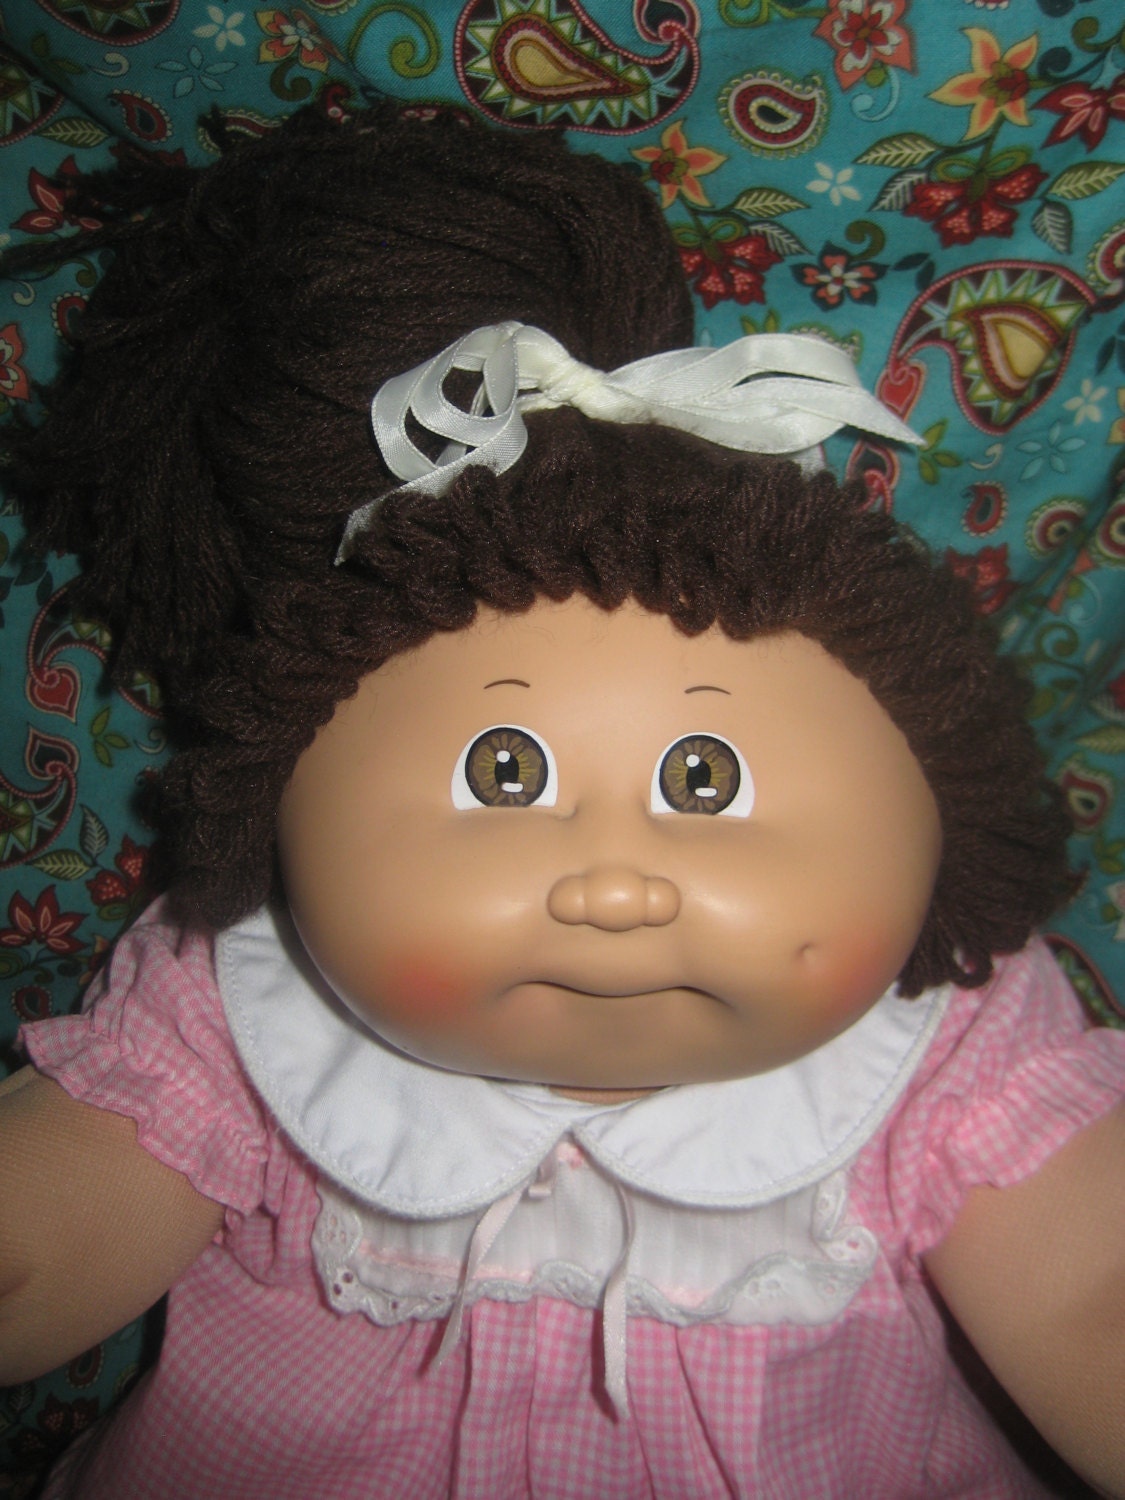 Vintage Cabbage Patch Kid Doll Girl